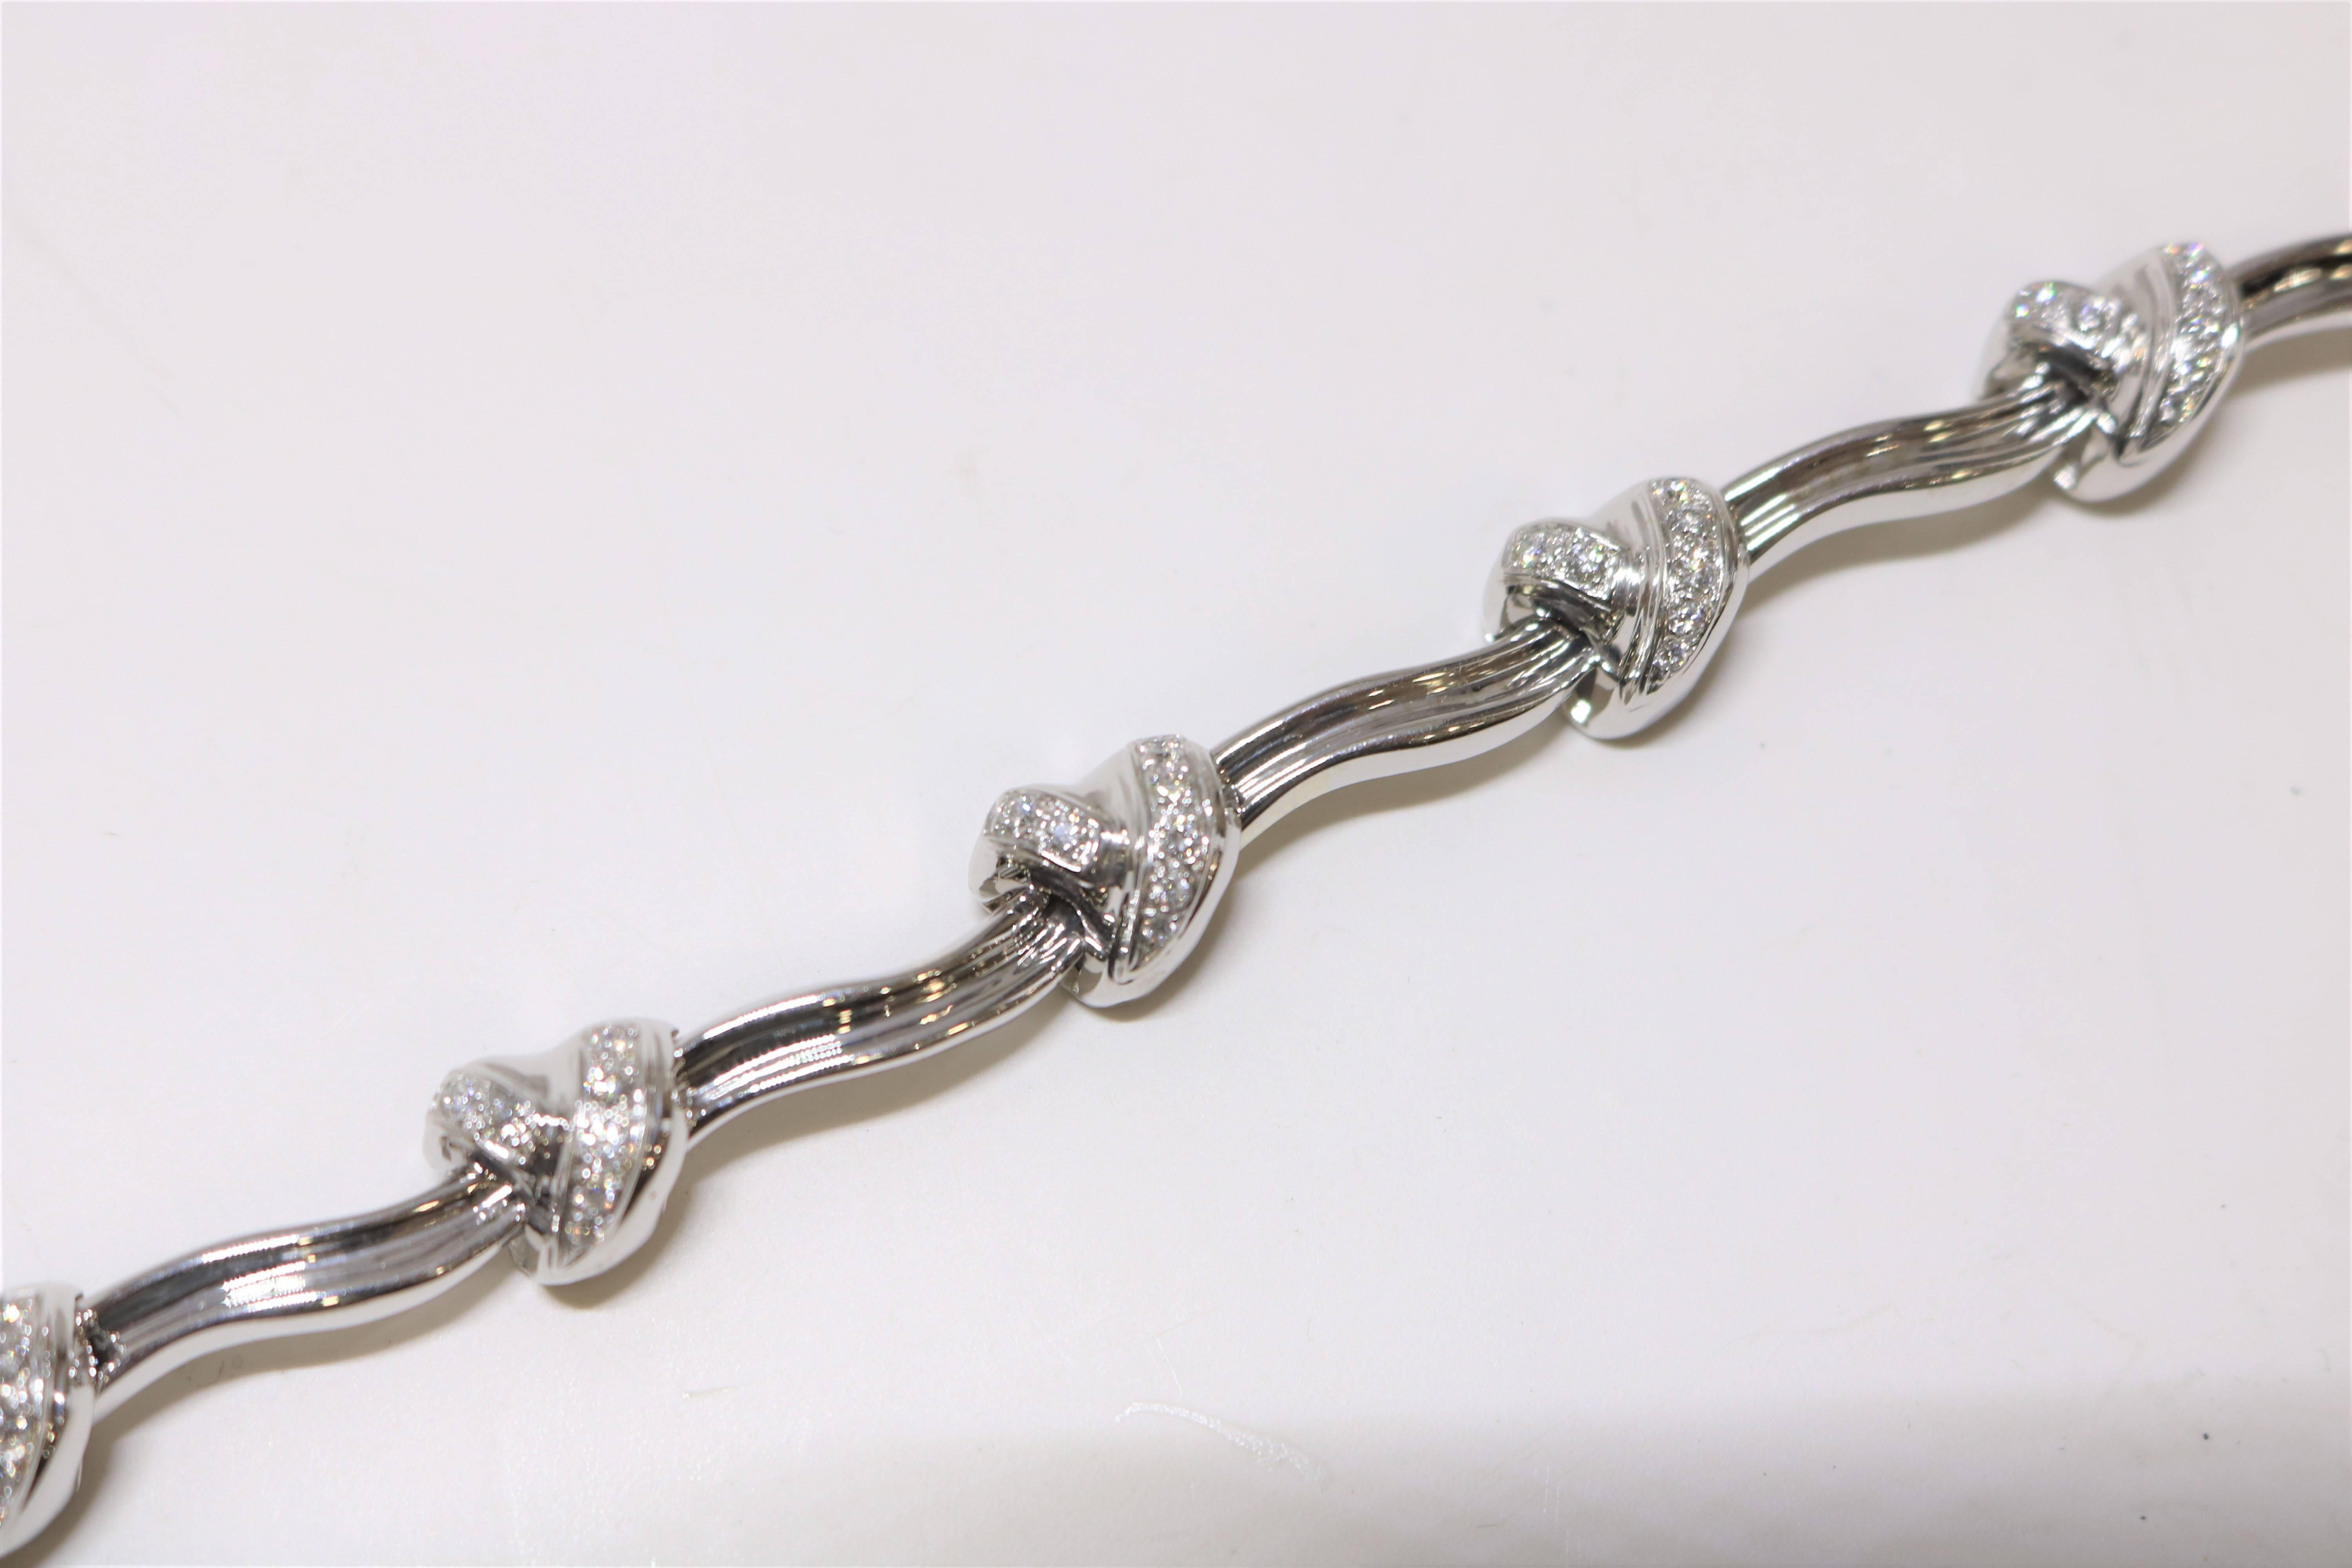 This bracelet is in 18k white gold set in a unusual "knot" style with diamonds on each knot with a total weight of 1.14 cts. 